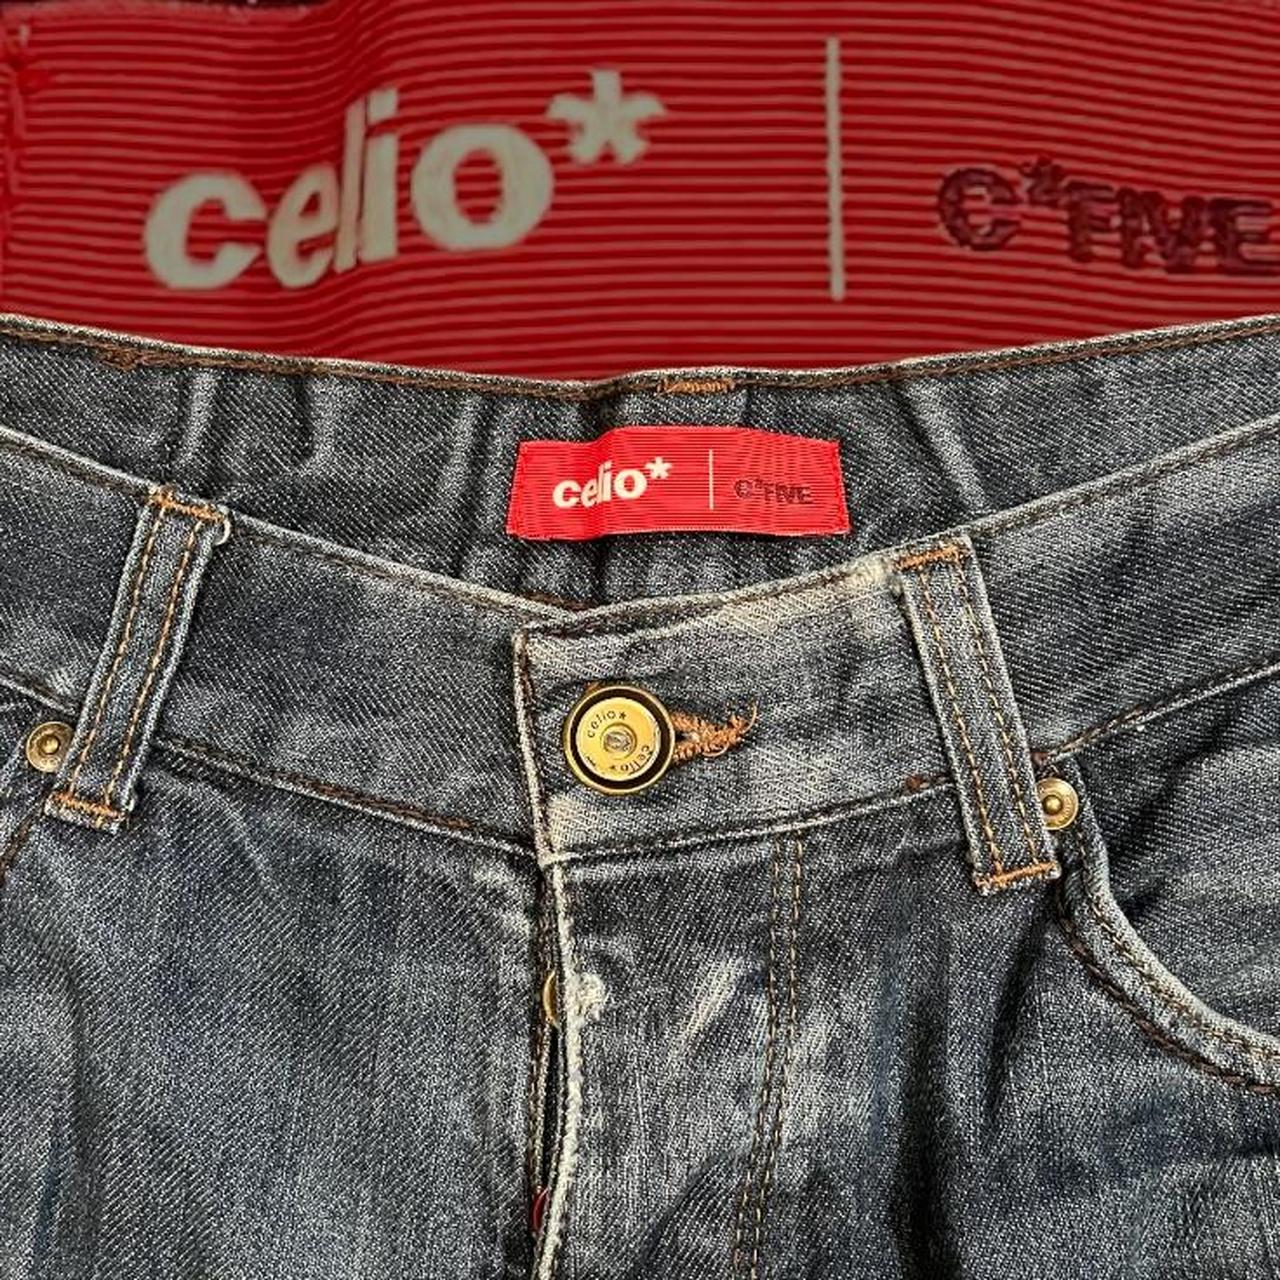 Celio Men's Blue and Red Jeans (3)